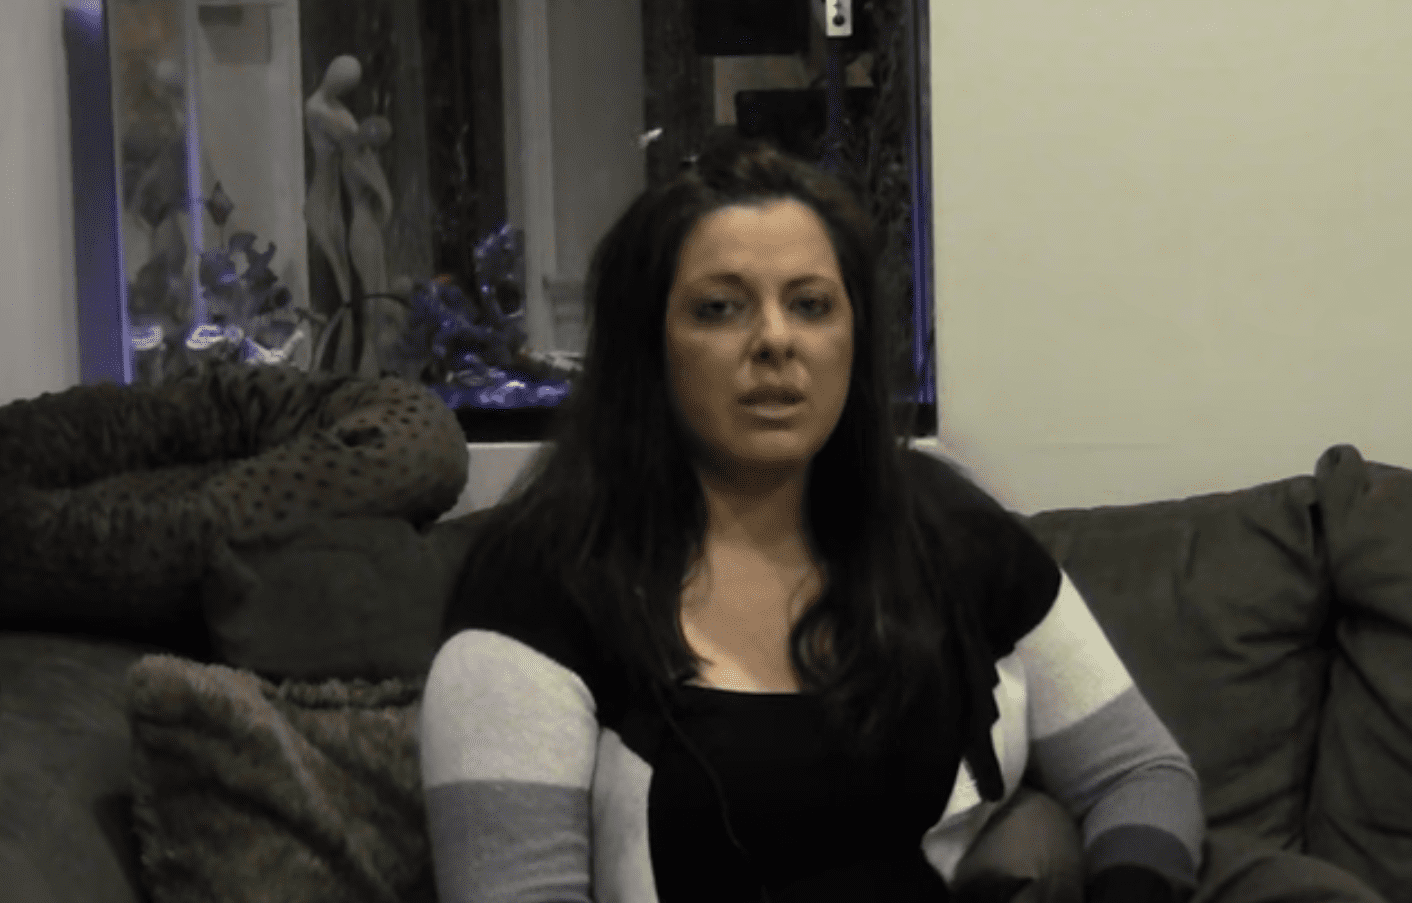 Dawn Marie speaks out in an interview for Wrestlers Rescue. | Photo: Youtube/MUPO ENTERTAINMENT LLC